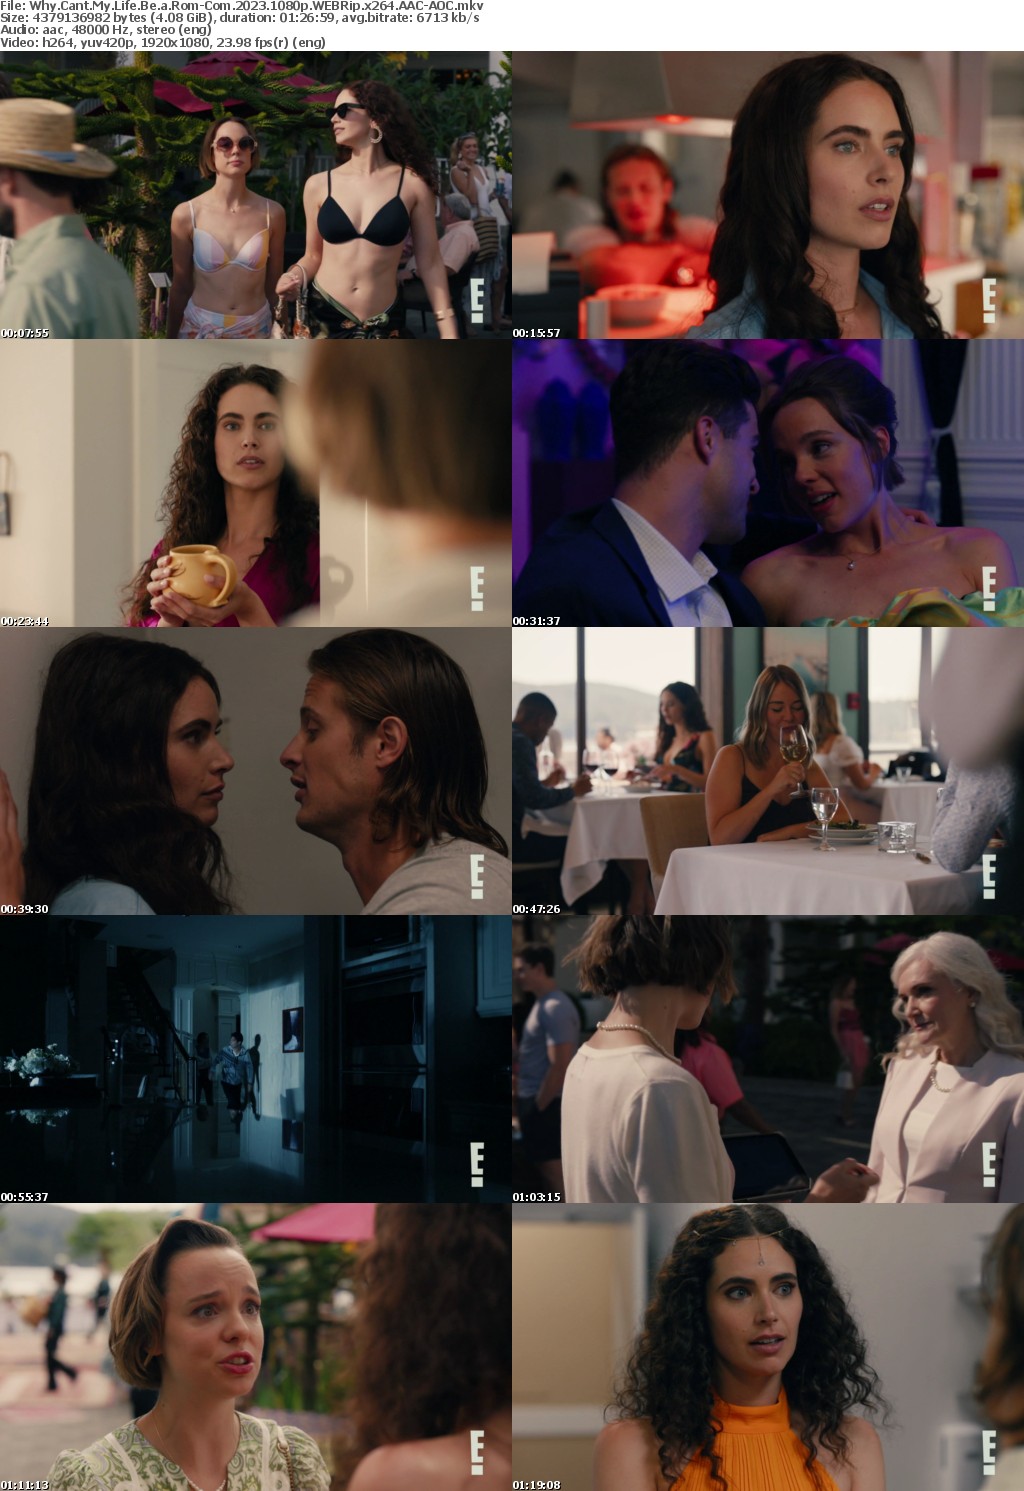 Why Cant My Life Be a Rom-Com 2023 1080p WEBRip x264 AAC-AOC